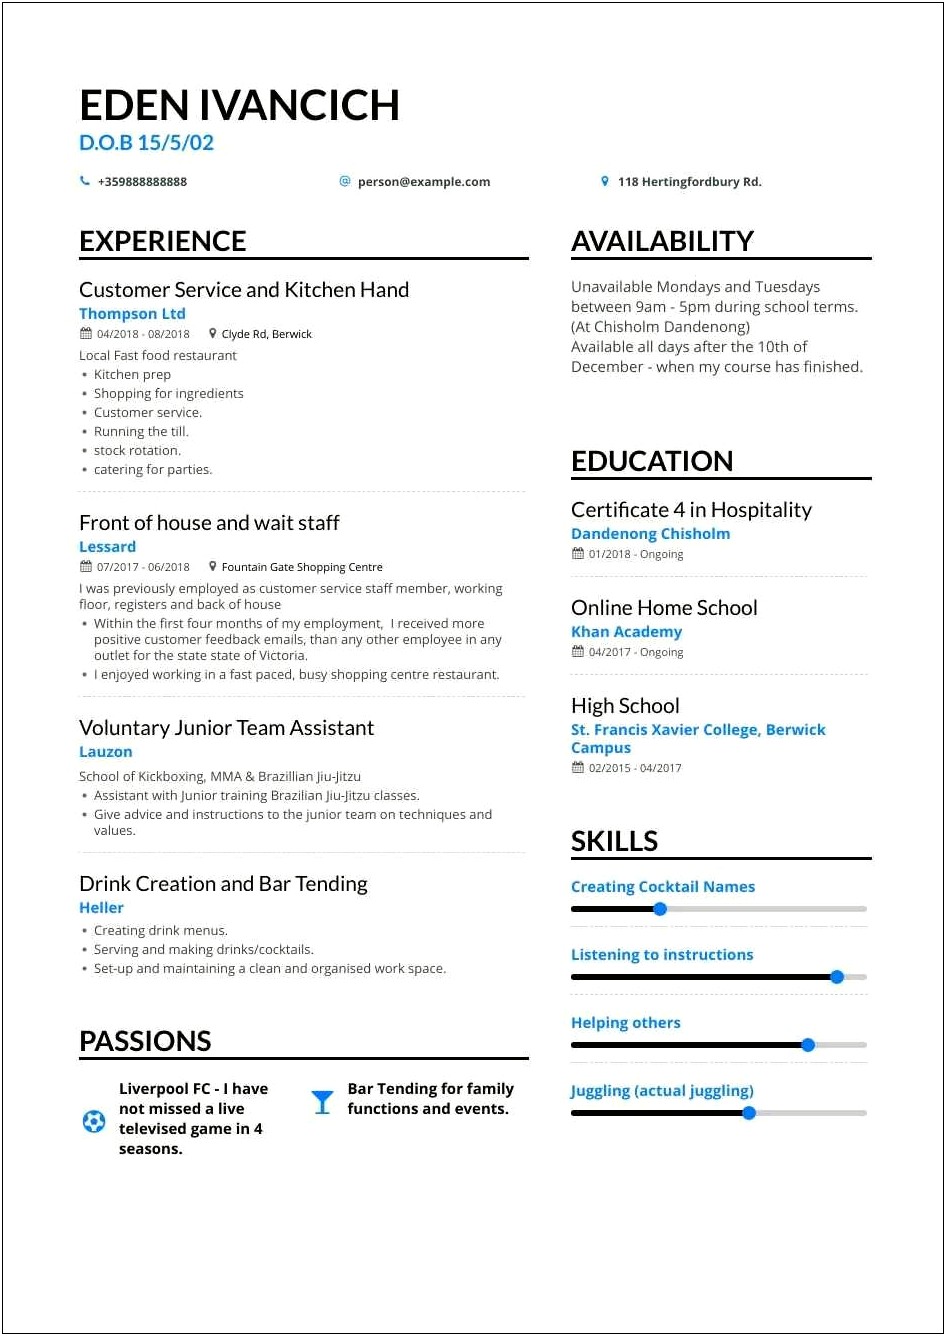 Resume Format 2018 For High School Students